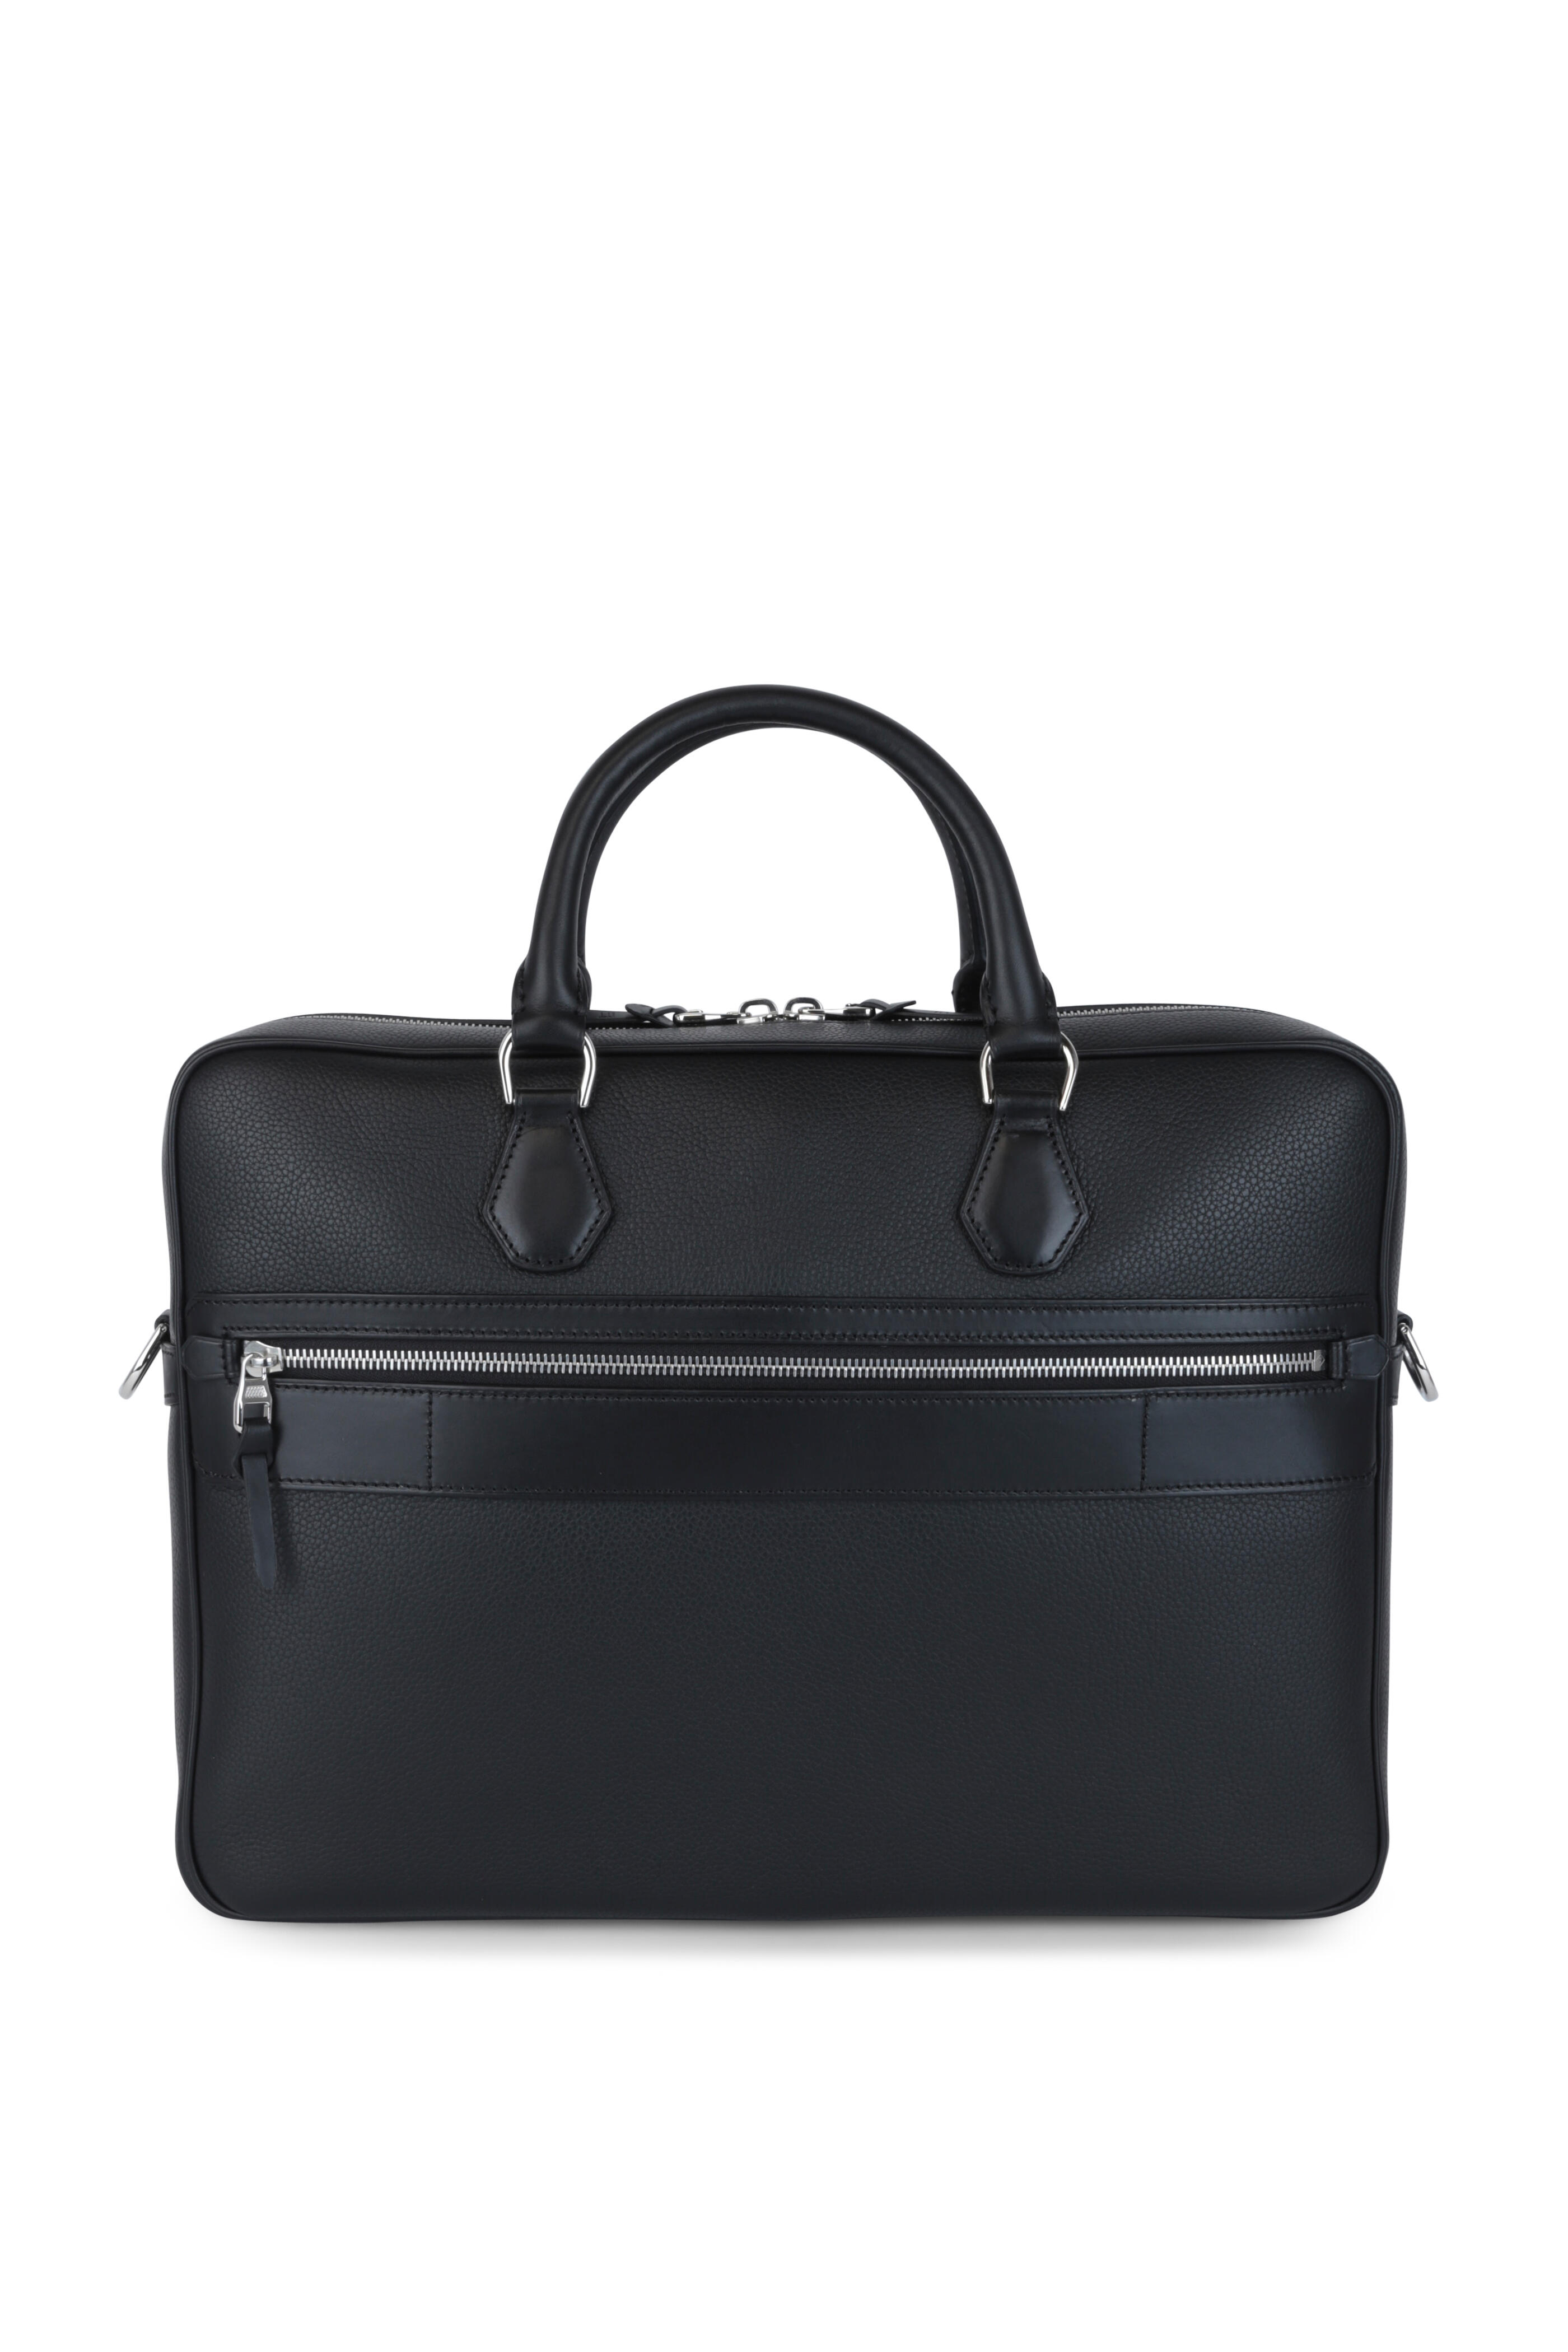 Dunhill - Boston Black Leather Case | Mitchell Stores